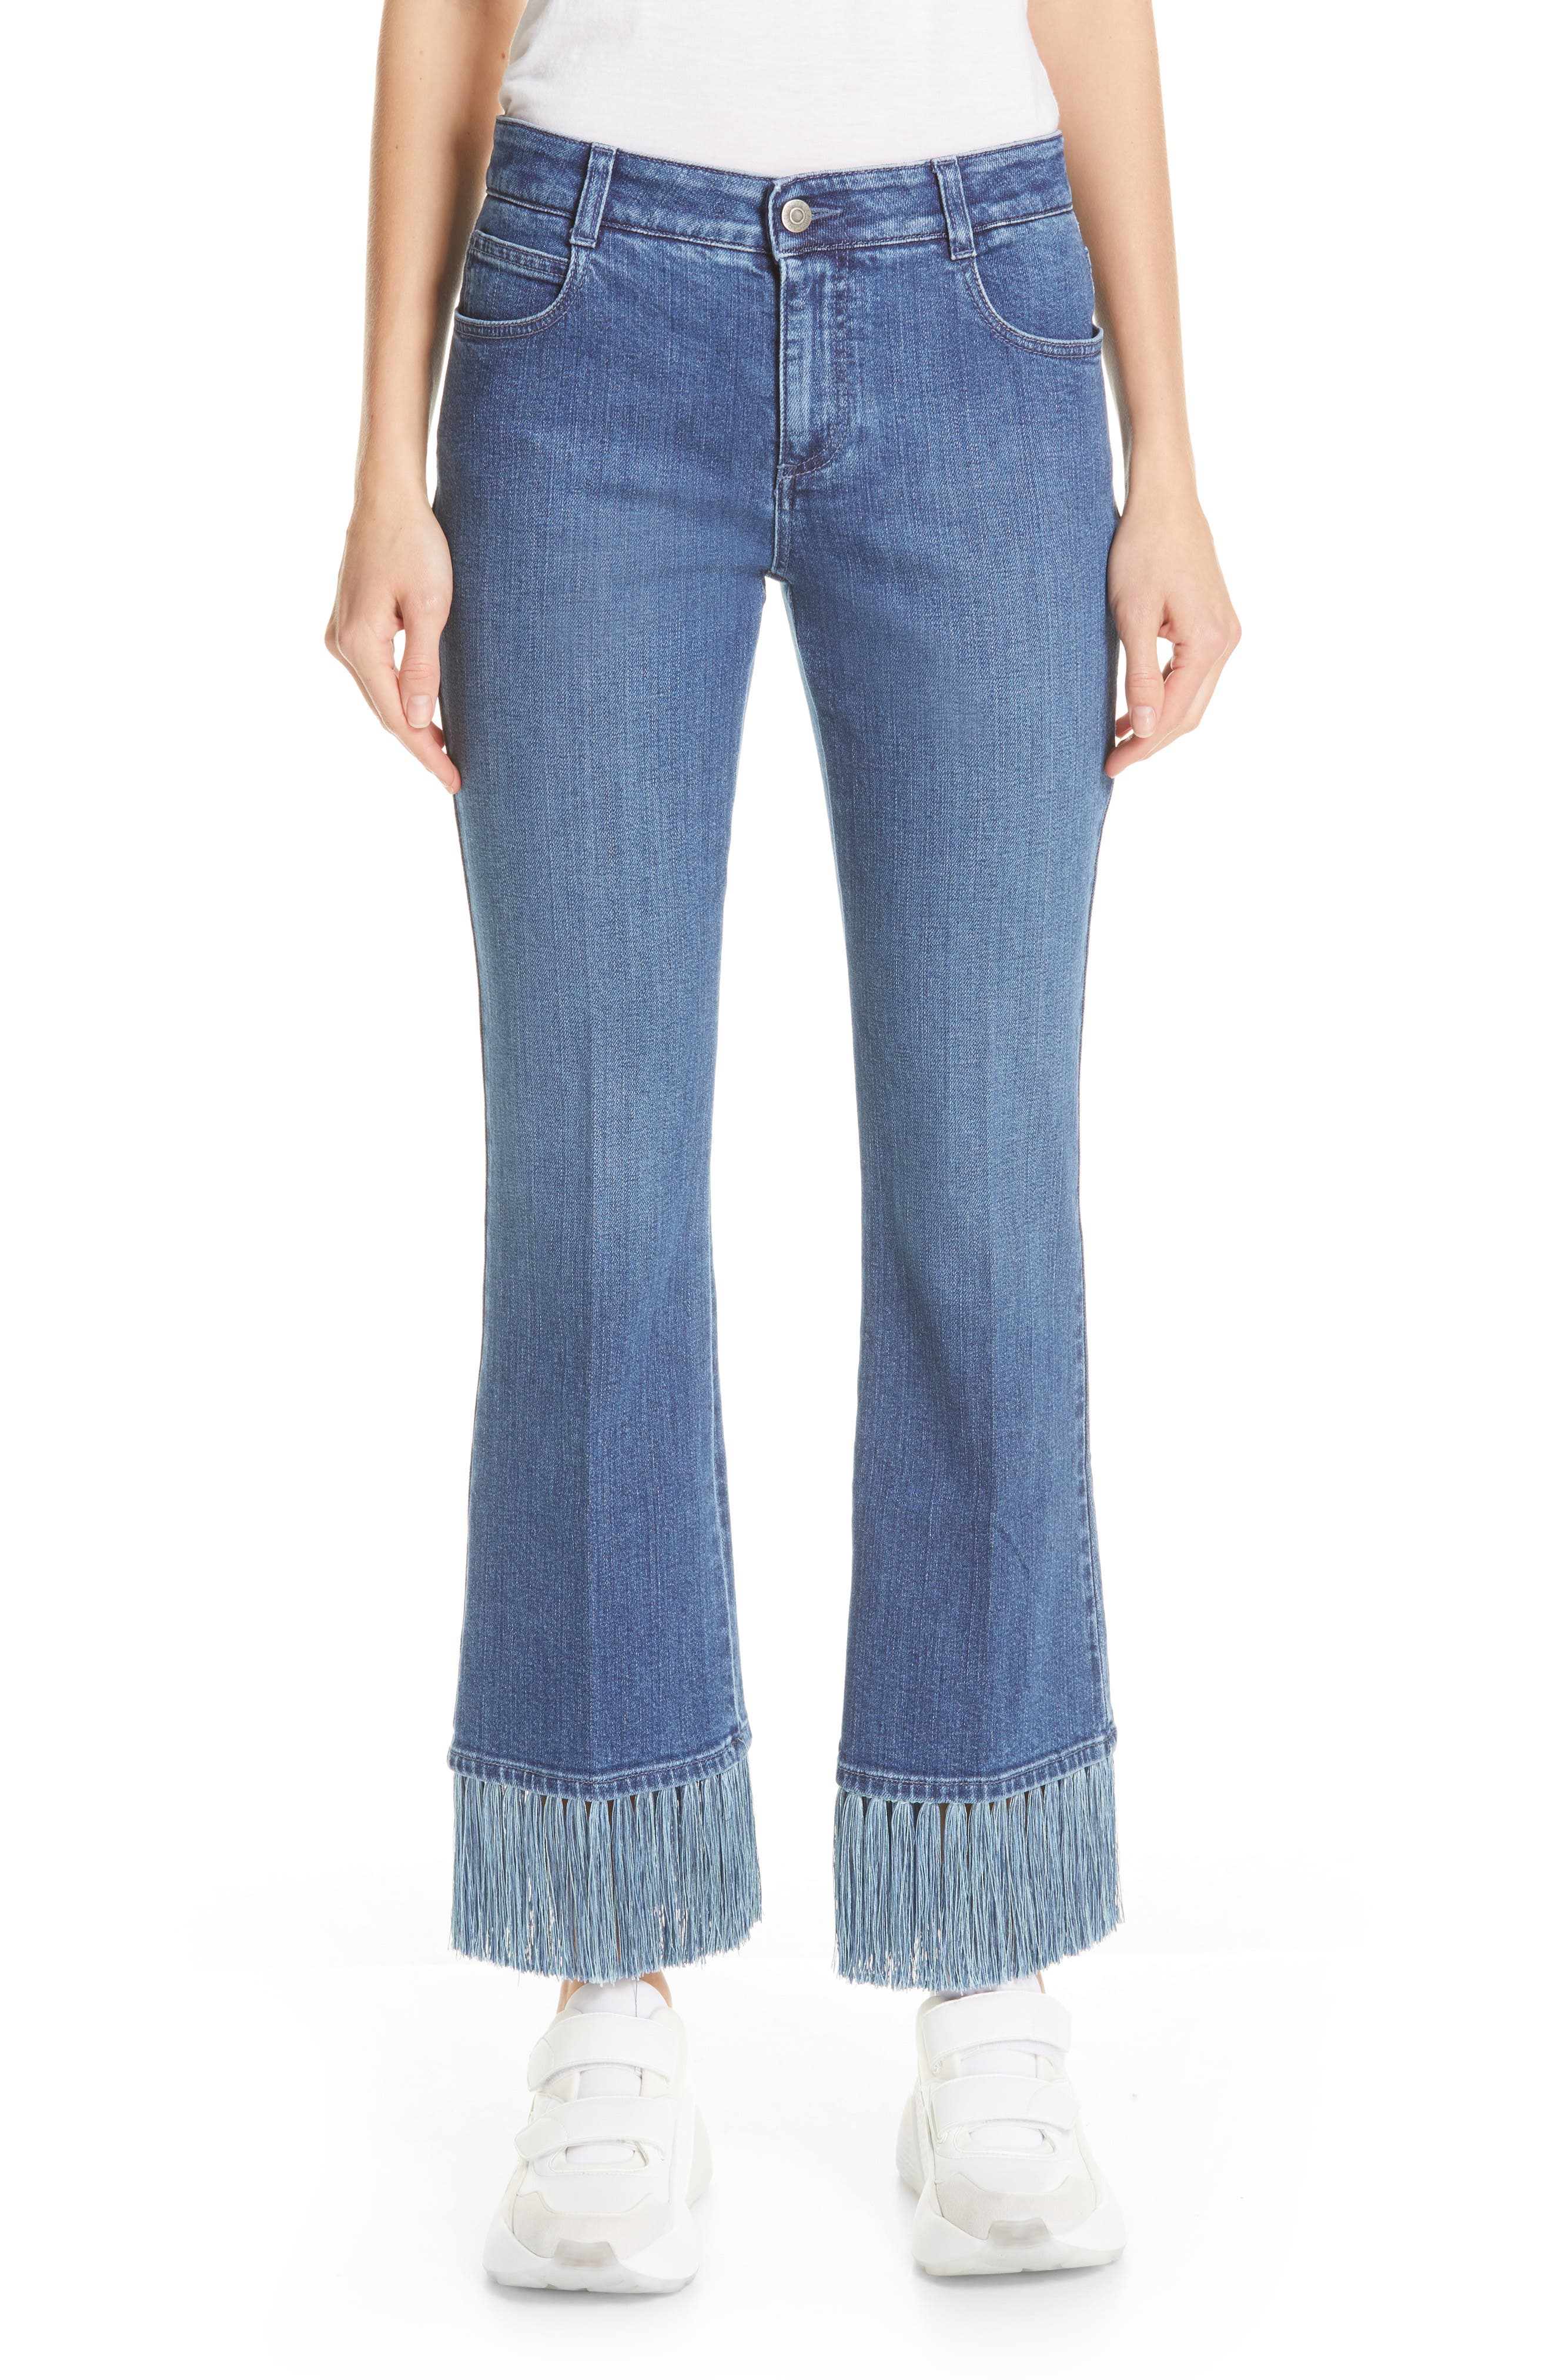 flare jeans with fringe